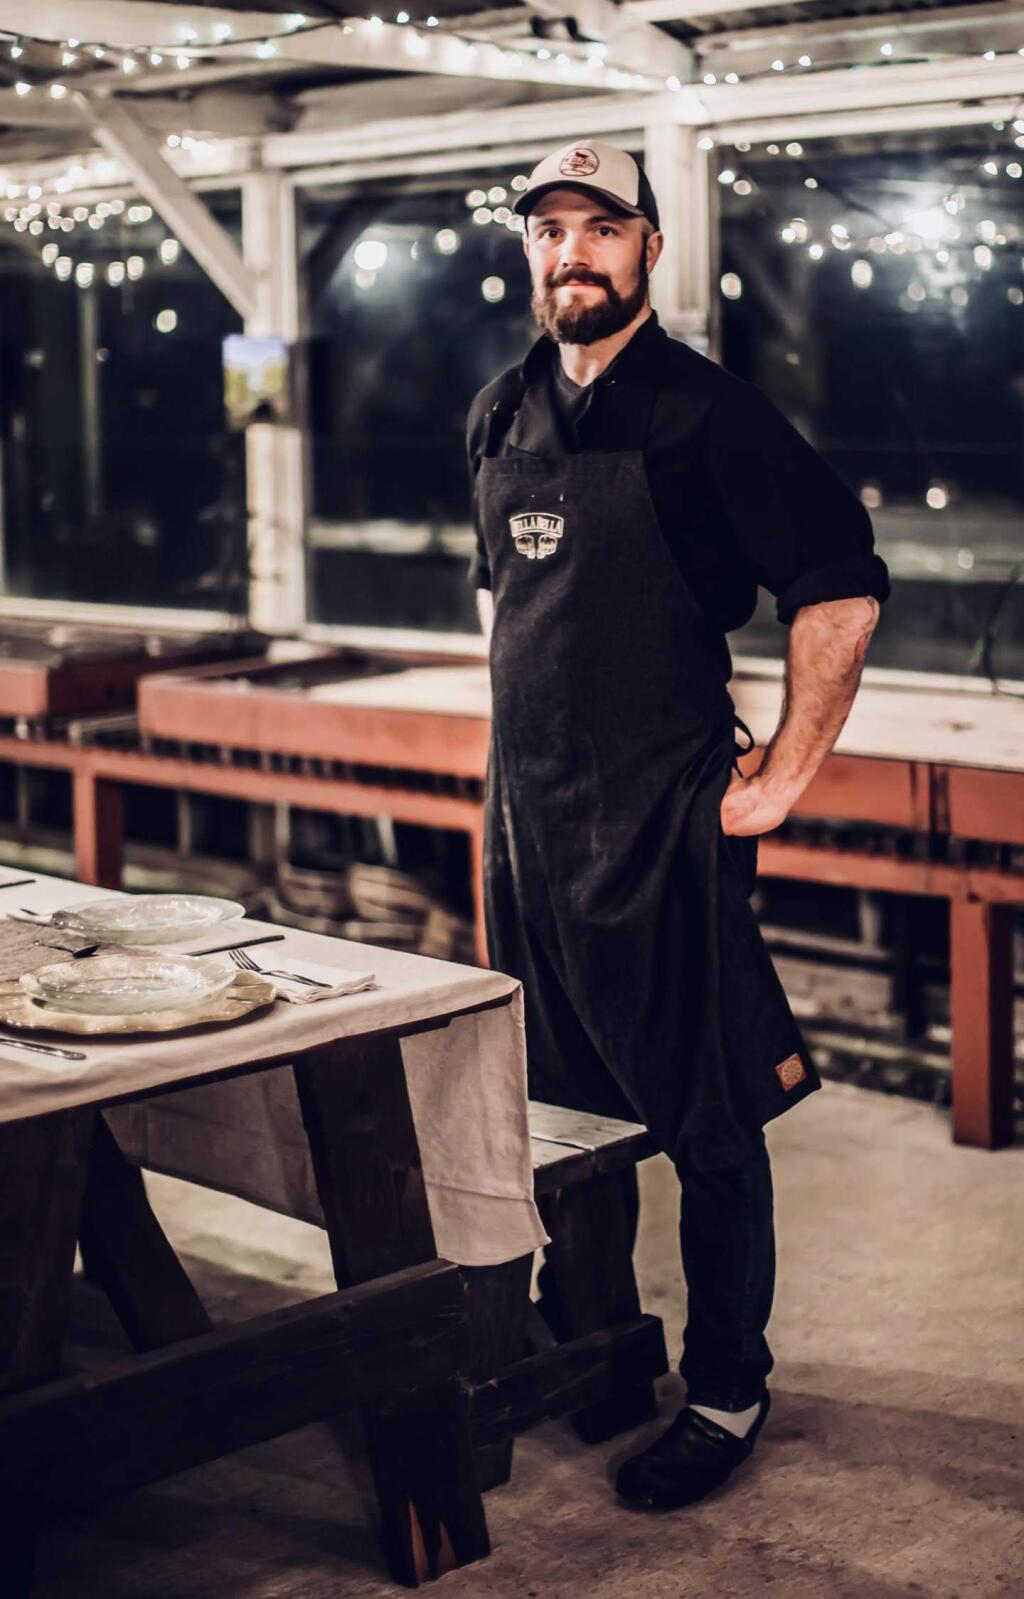 Chef Andrew Garrett, SVHS class of 2000, has now competed on the Food Network twice.